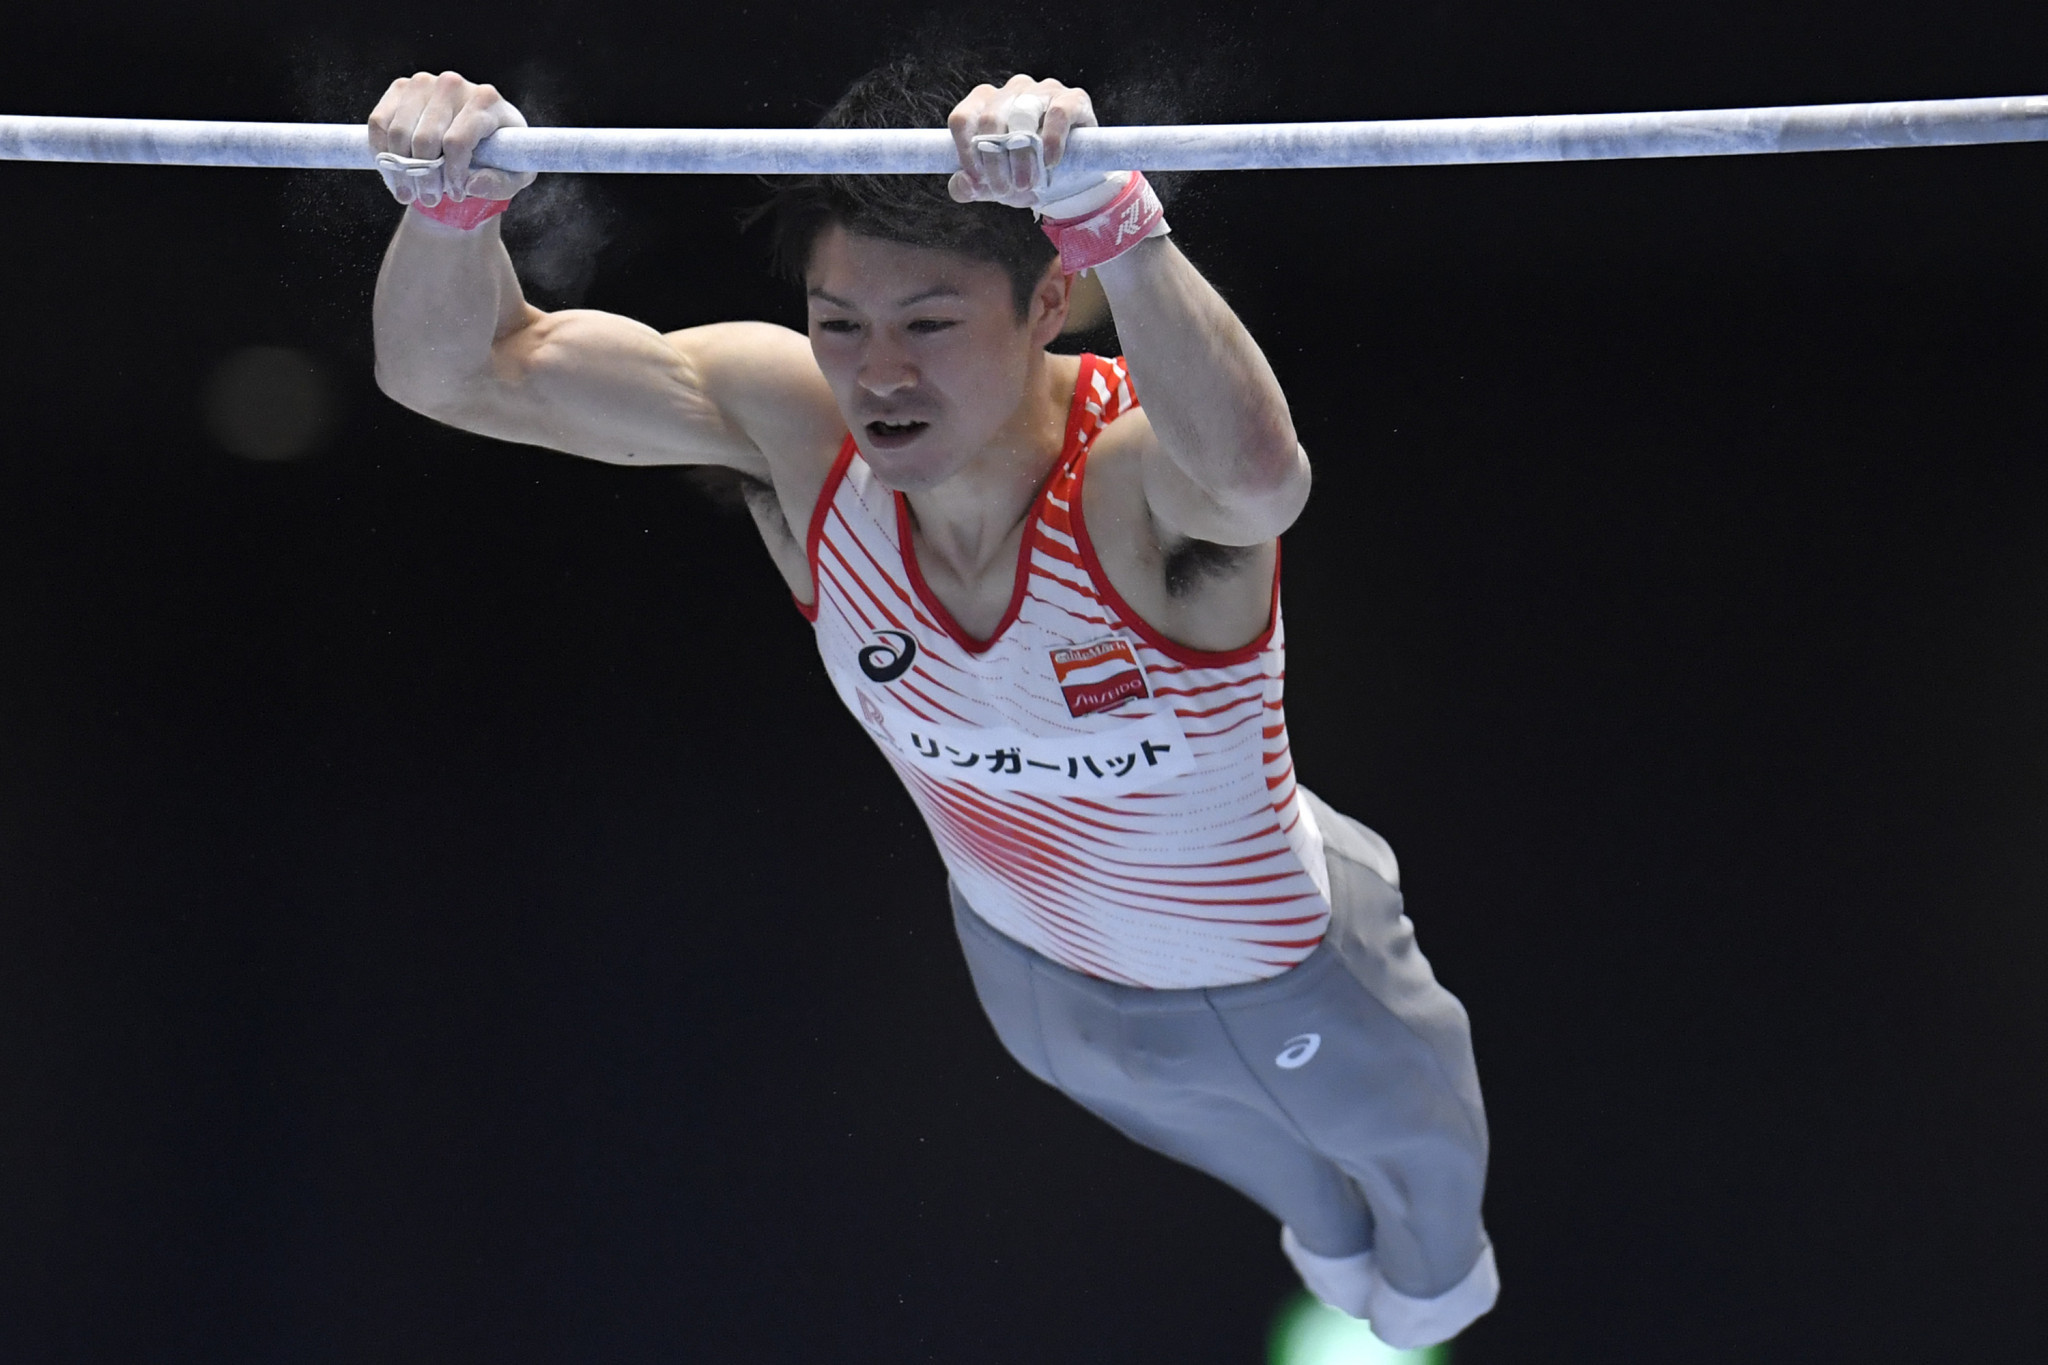 "King Kōhei" aiming for seventh straight all-around crown at Artistic Gymnastics World Championships in Montreal